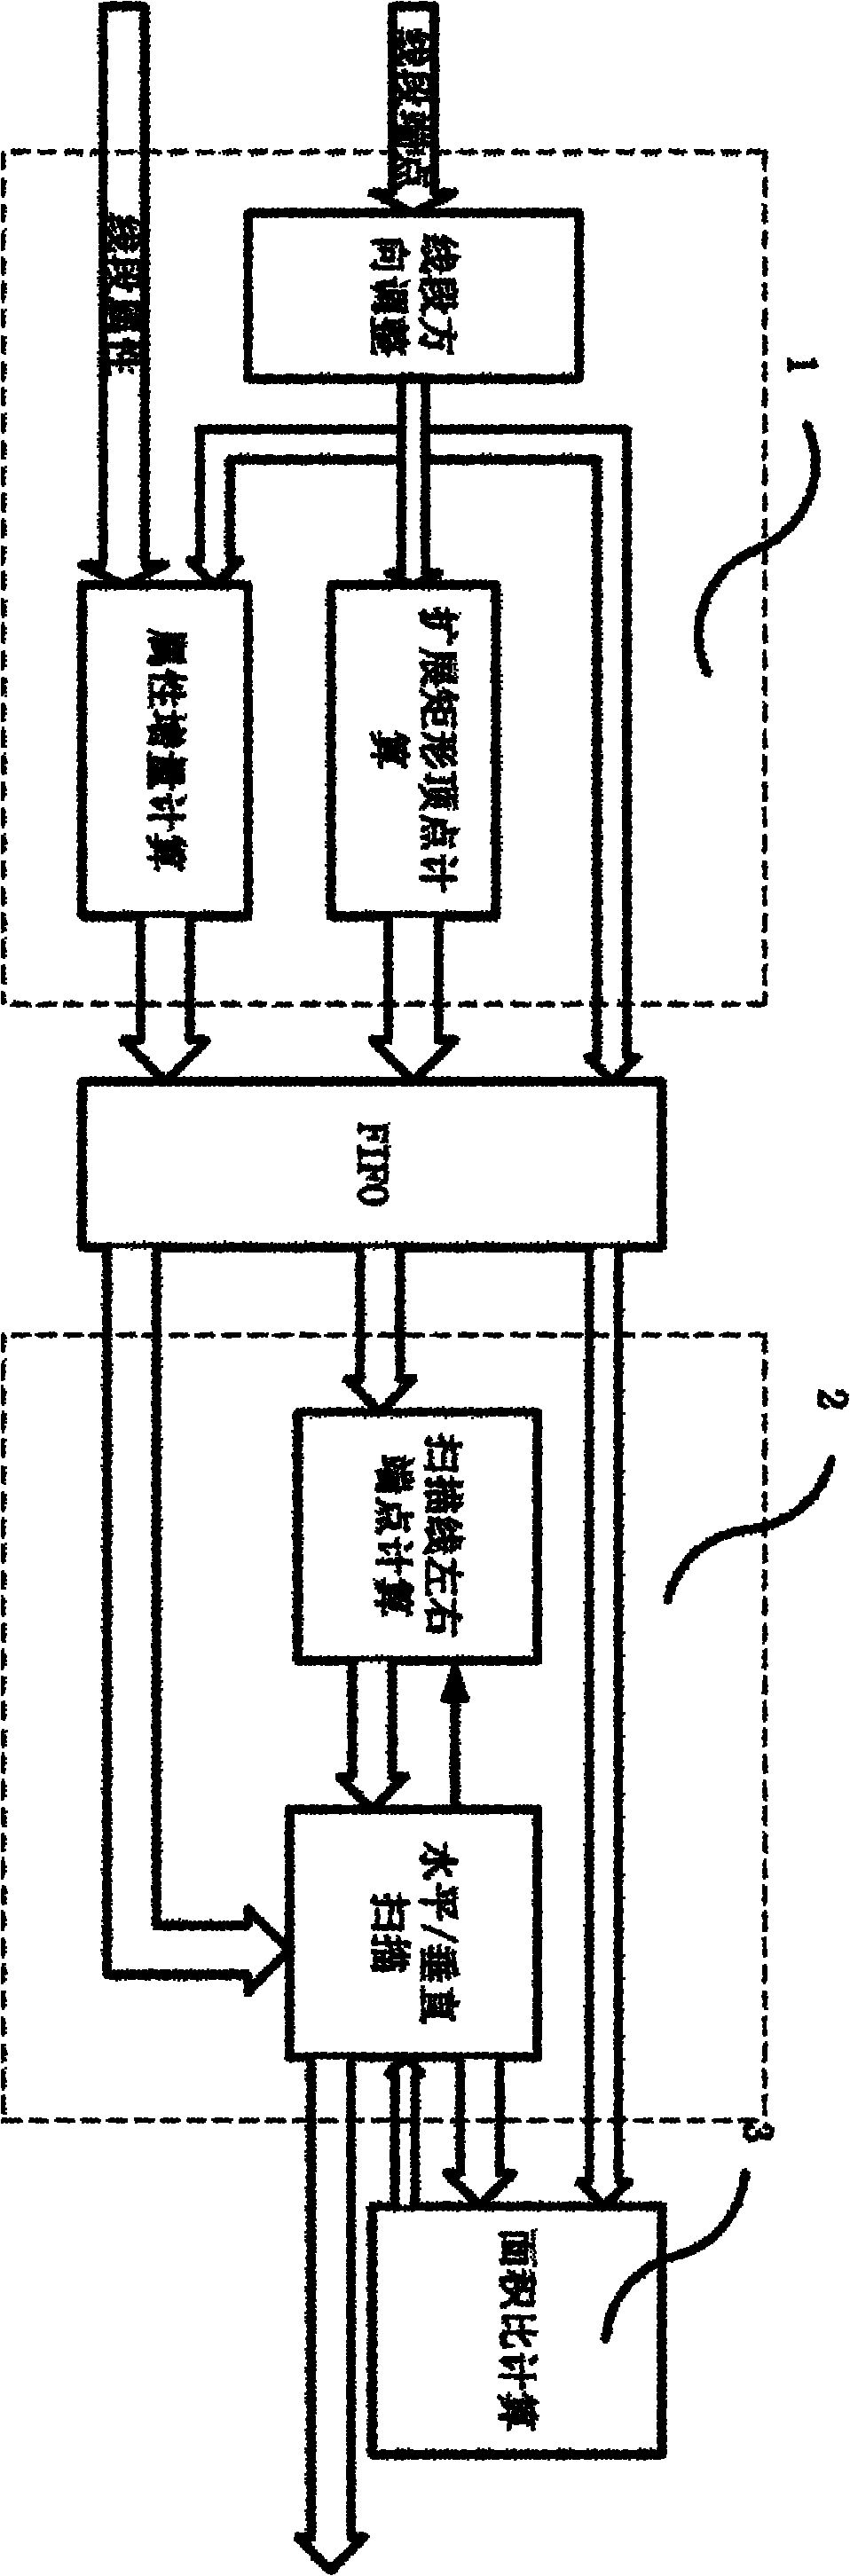 Method for realizing anti-aliasing of line segment integrating floating points and fixed points by using supersampling algorithm